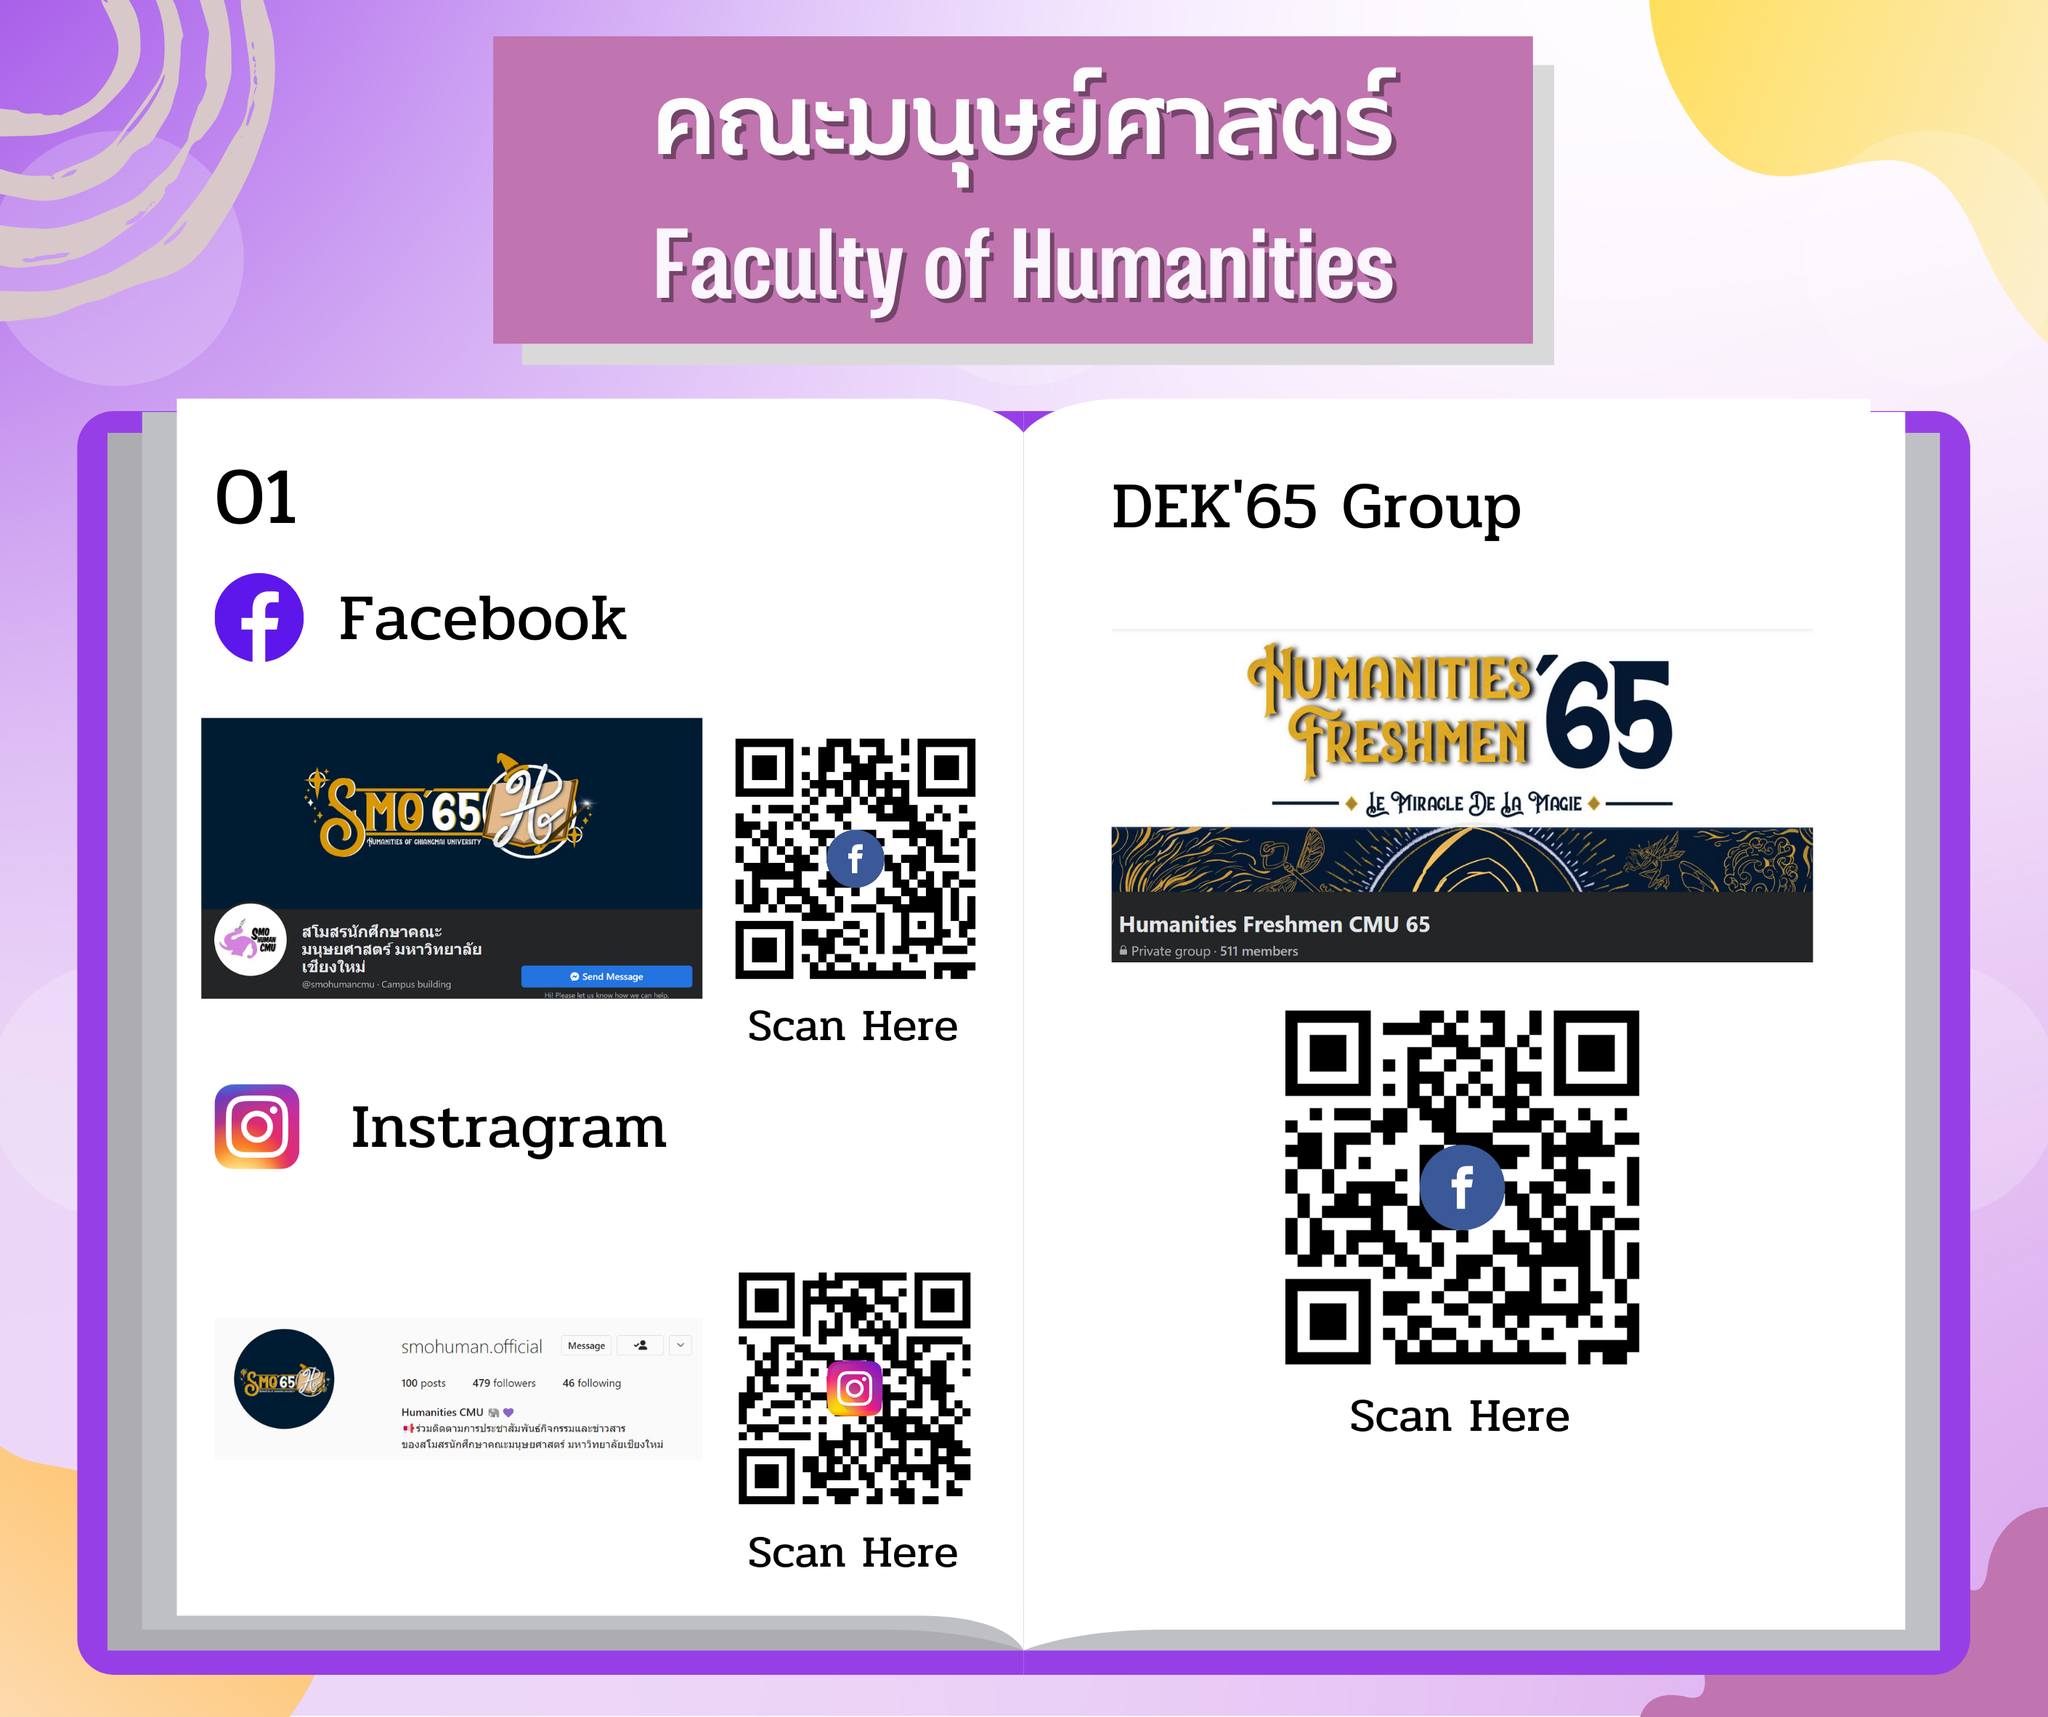 Student Union of Faculty of Humanities